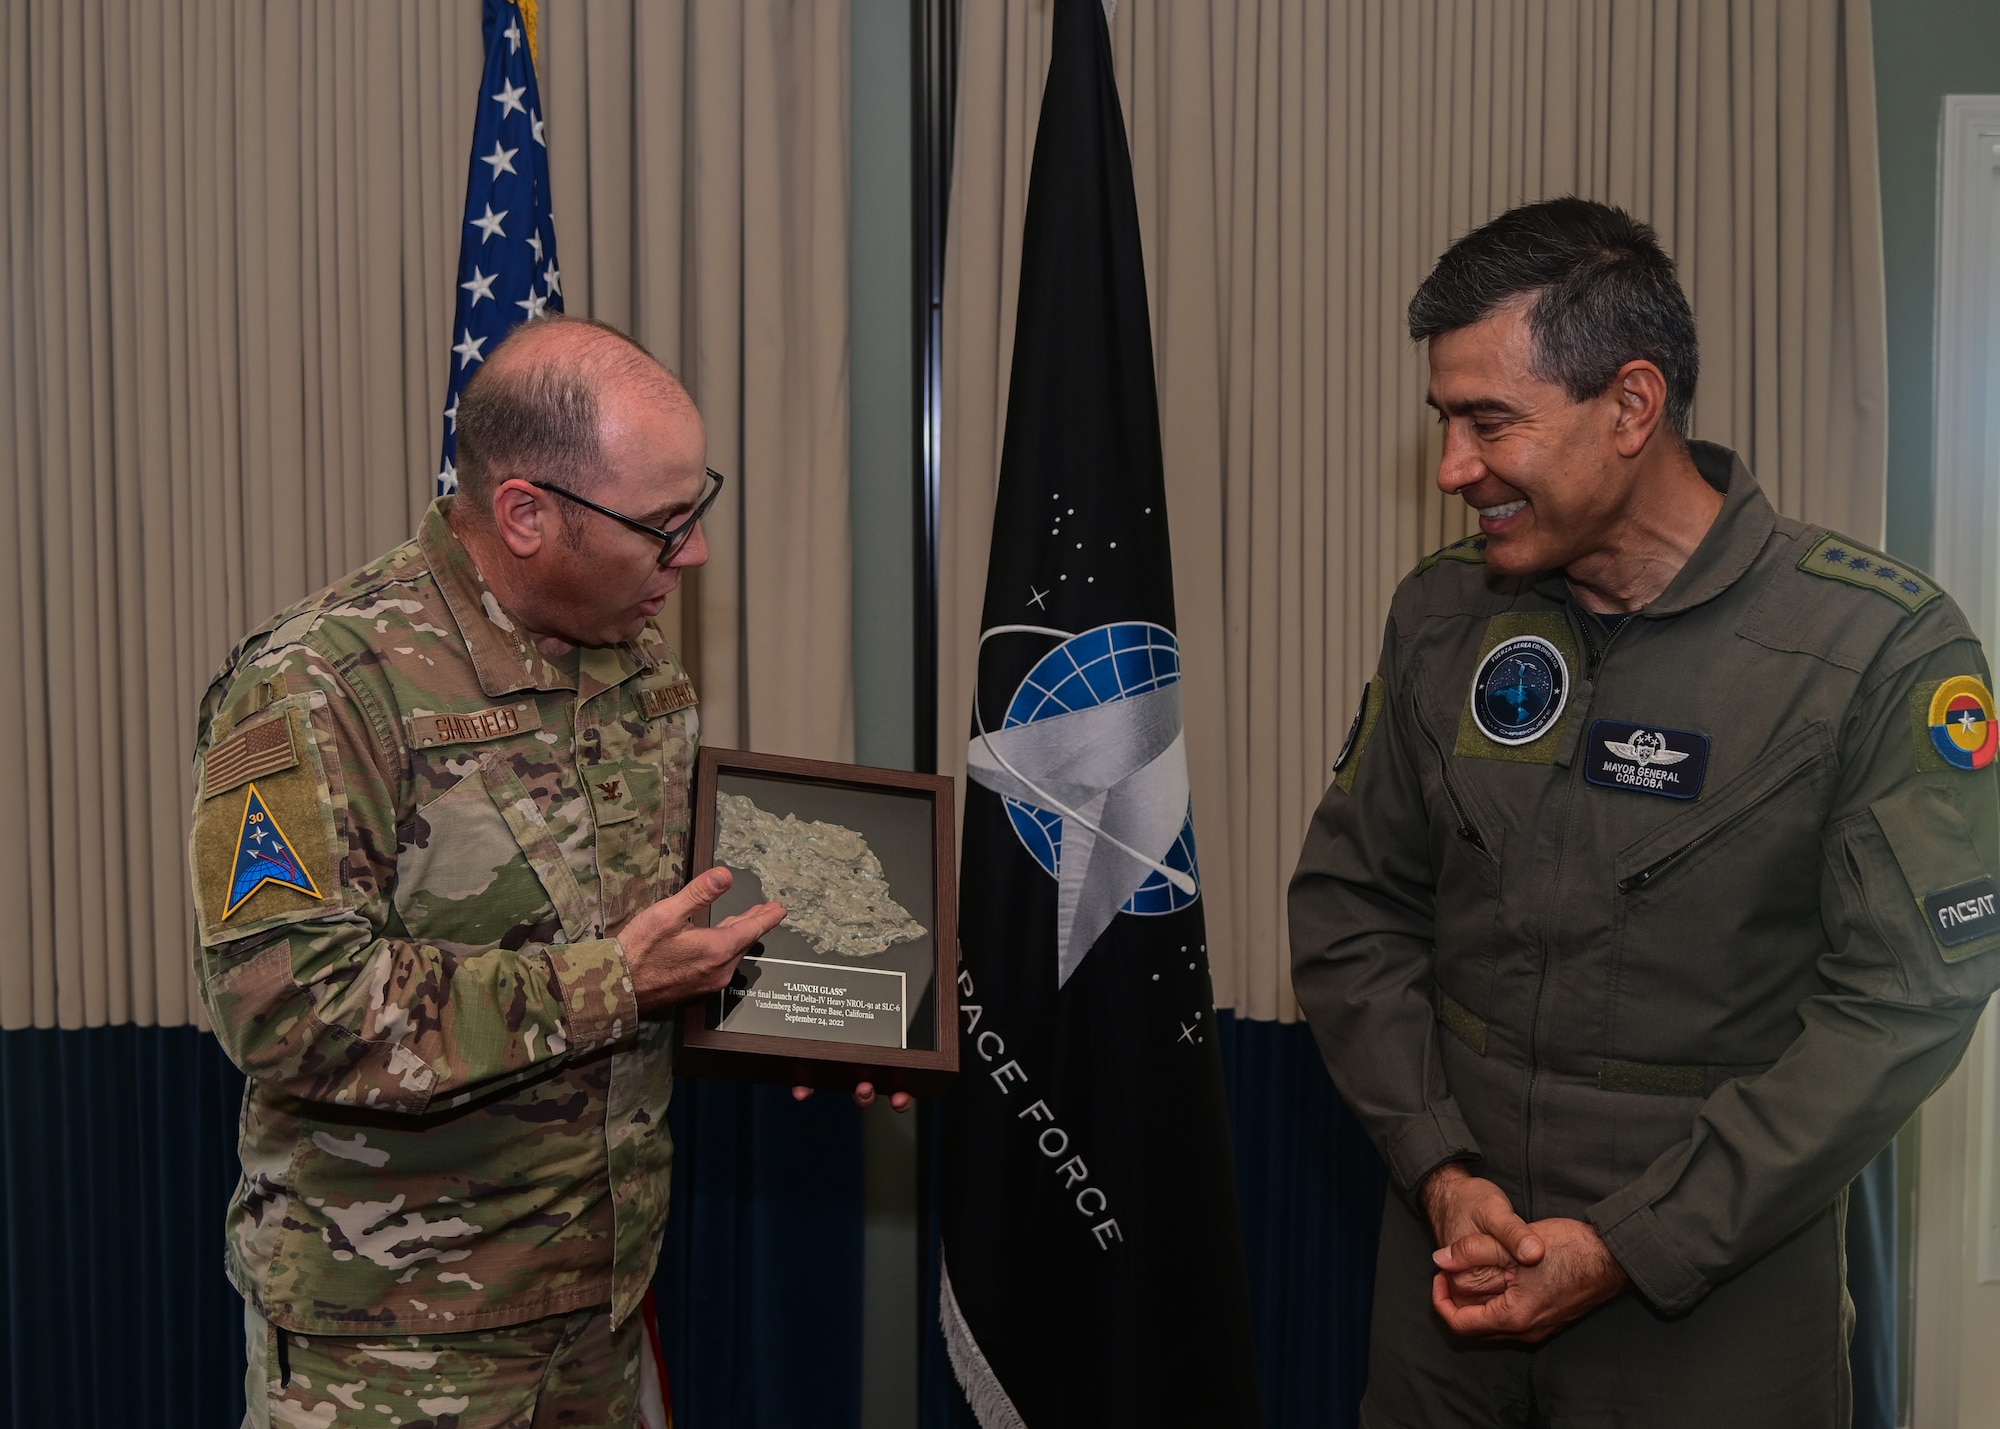 Colombian Air Force Gen. Luis C. Cordoba (right), Colombian Air Force commander, receives a piece of “launch glass” as a gift from U.S. Air Force Col. Christopher Sheffield (left), Space Launch Delta 30 vice commander, during a visit to Vandenberg Space Force Base, Calif., April 10, 2023. Gen. Córdoba led a delegation of industry and academia representatives to witness the launch of COLAF's second-ever nanosatellite in partnership with EXOLAUNCH and SpaceX. (U.S. Space Force photo by Airman 1st Class Ryan Quijas)